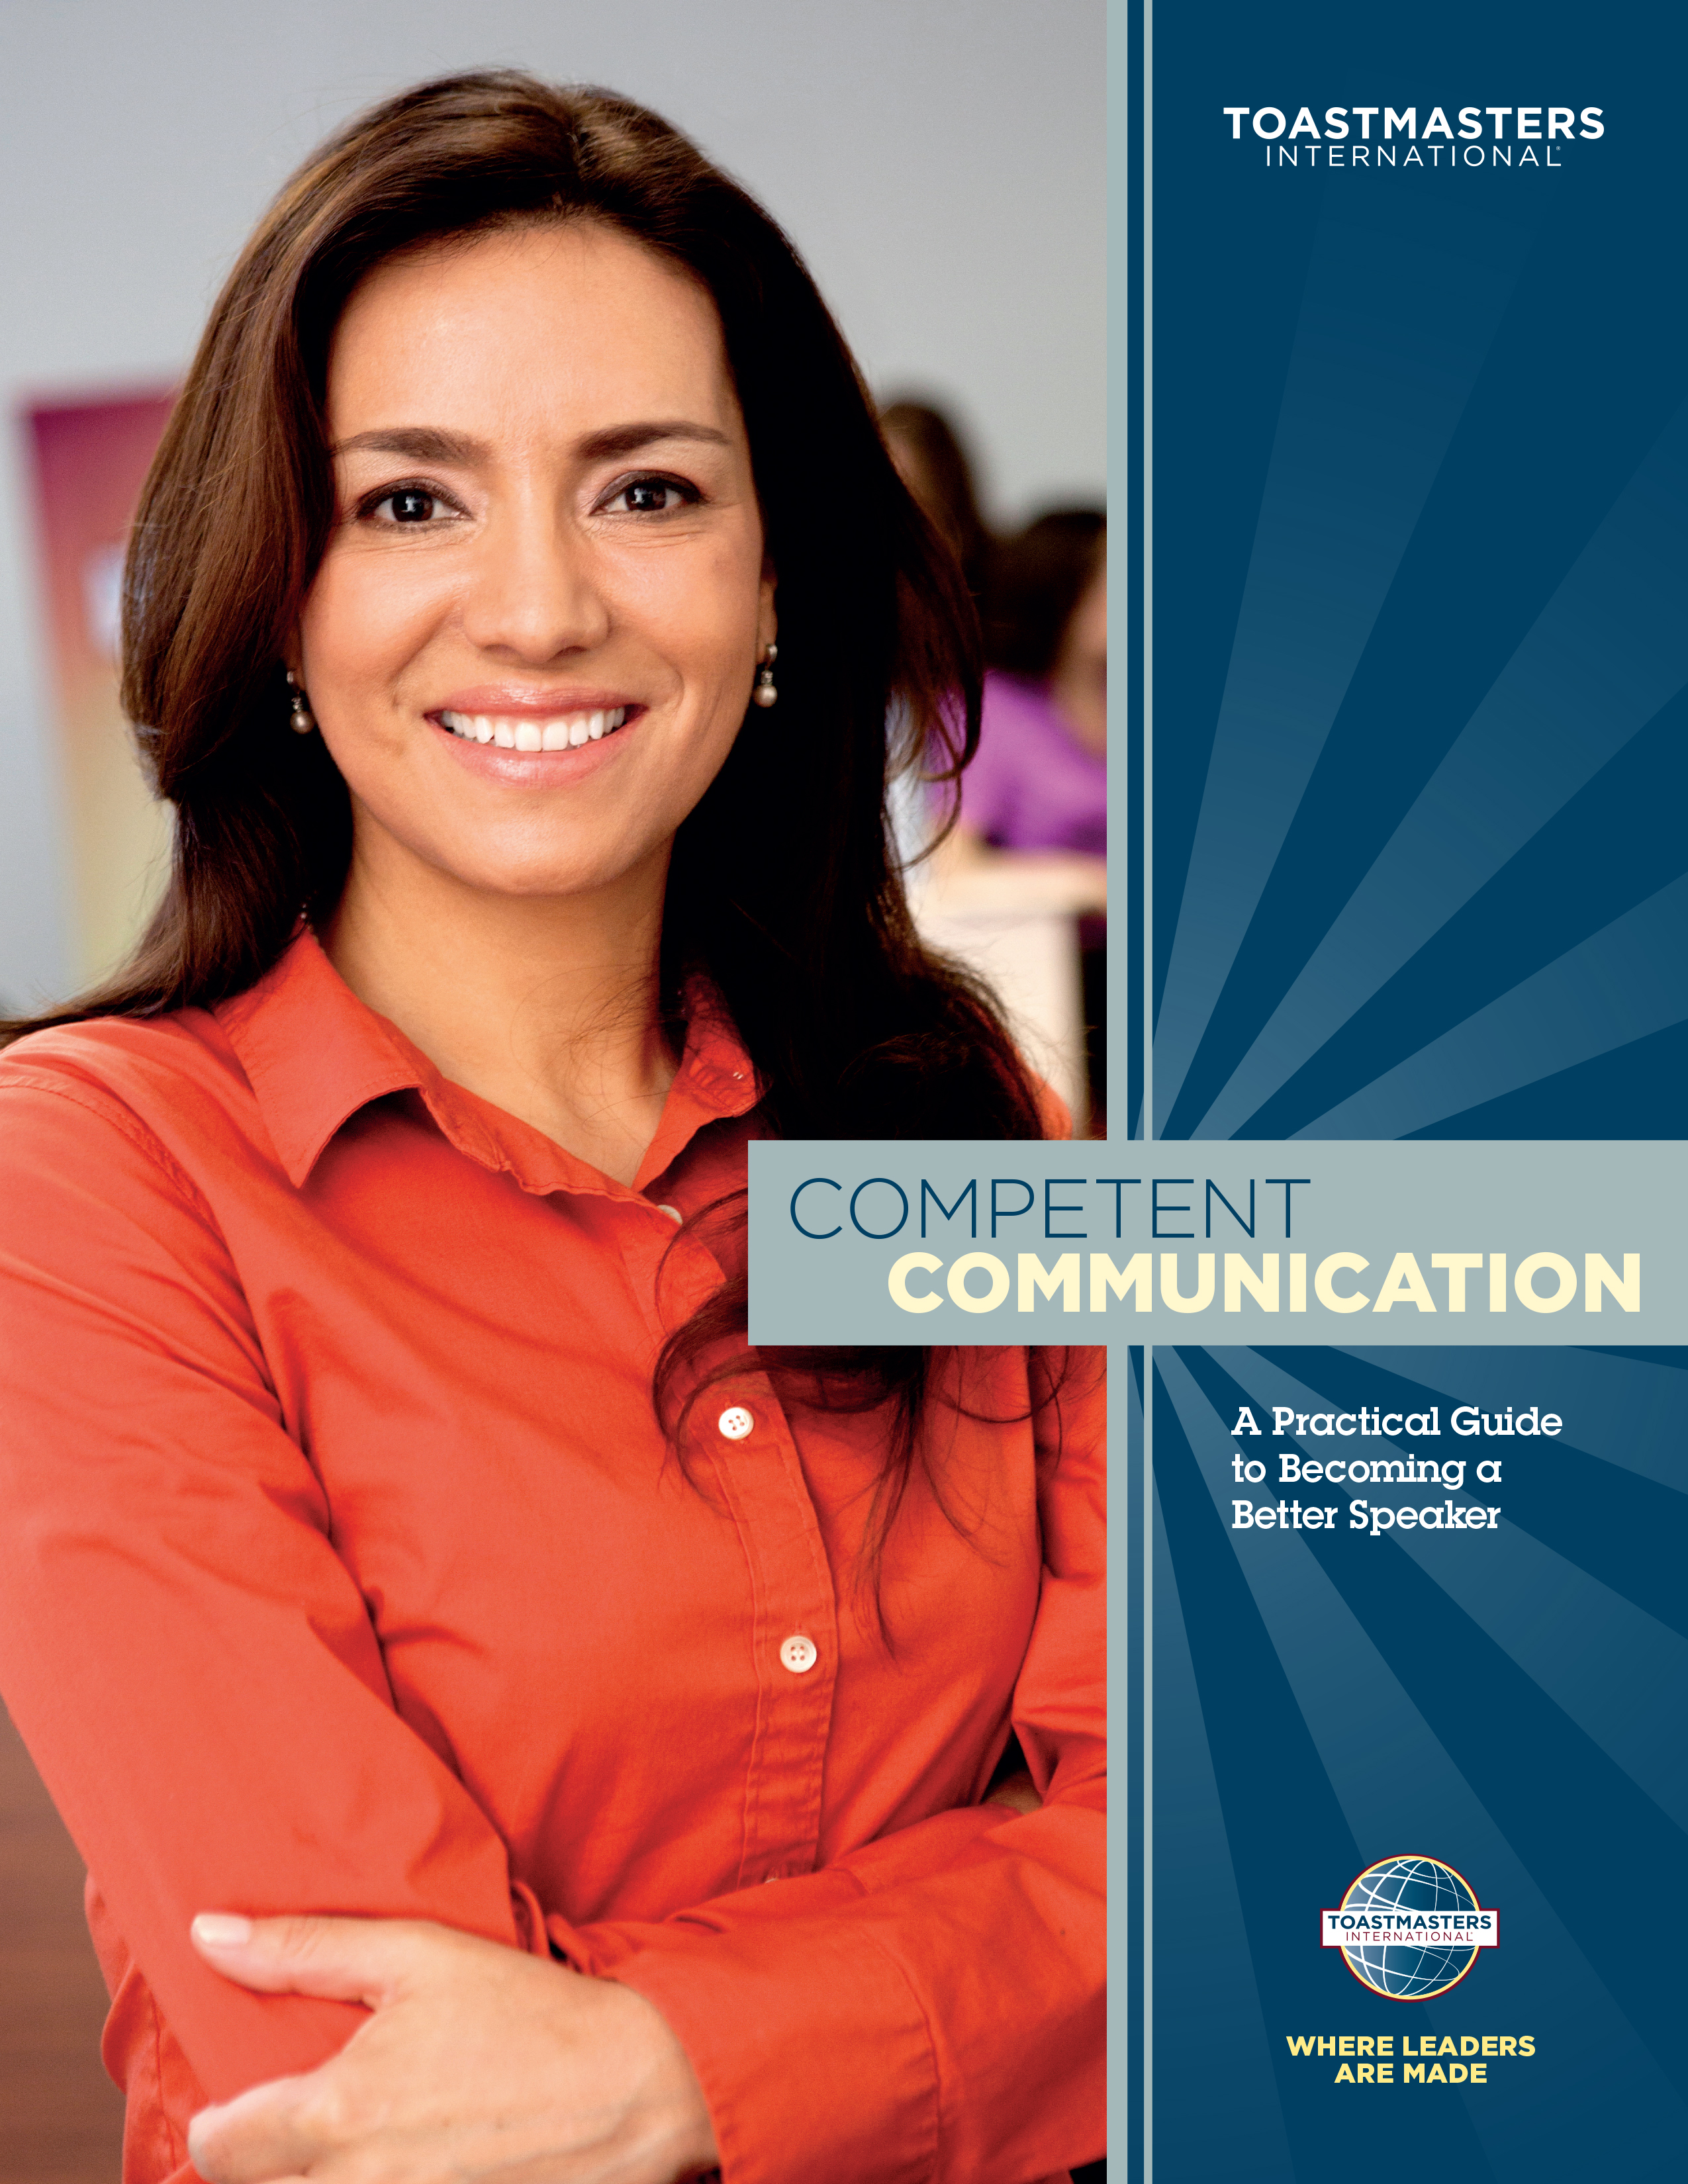 Cover of the "Competent Communicator" manual